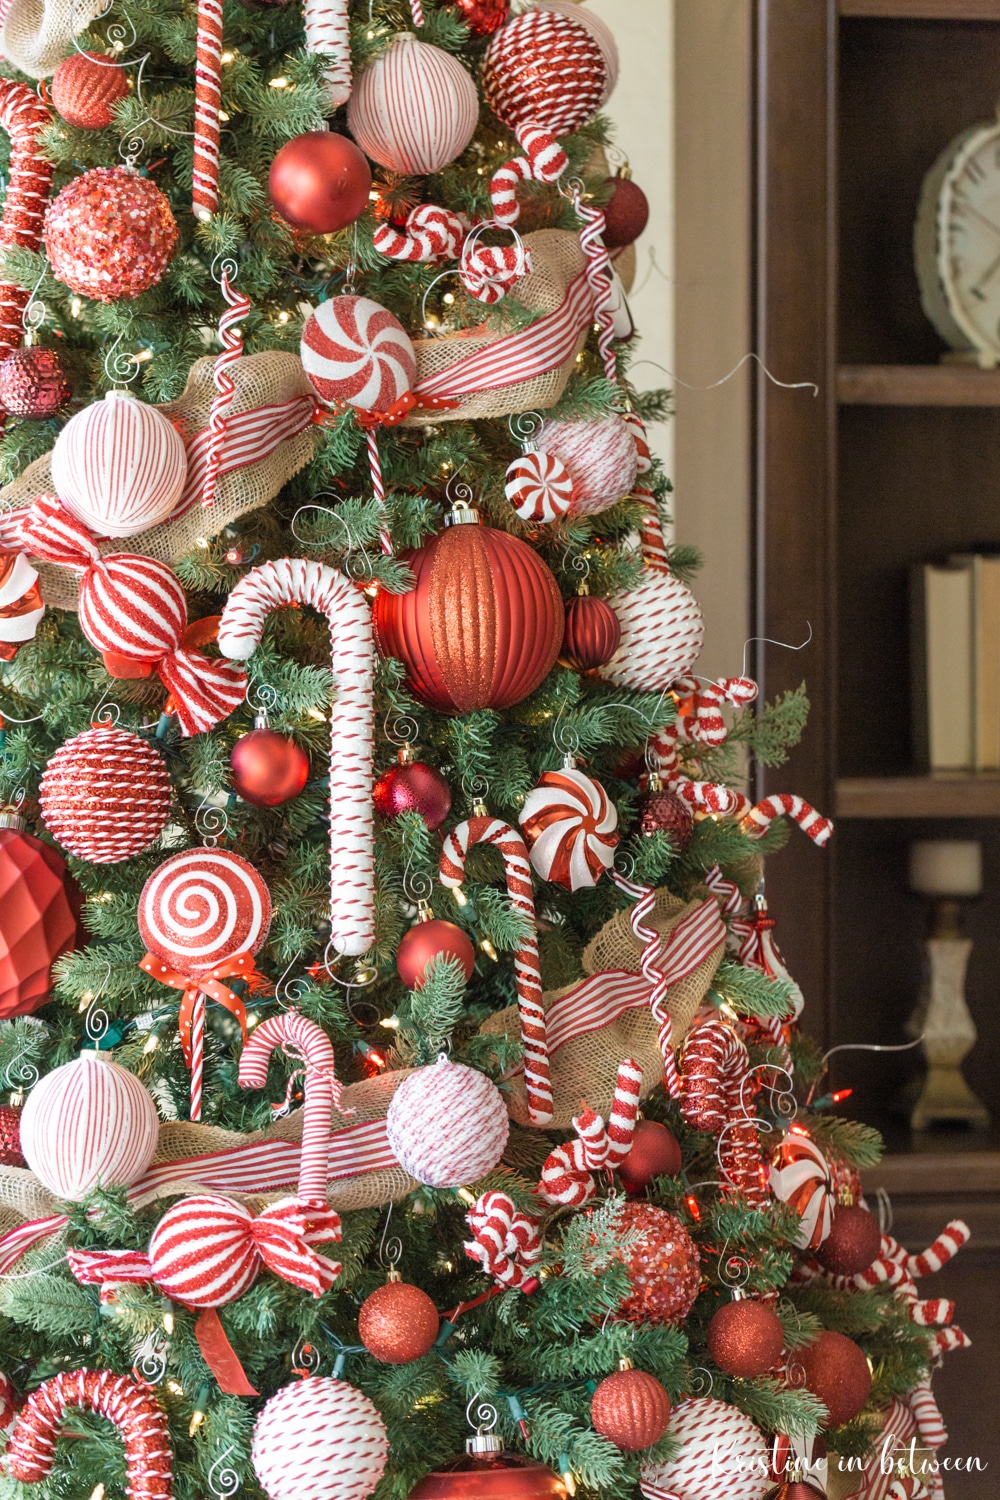 A Christmas tree decorated in red and white candy ornaments.